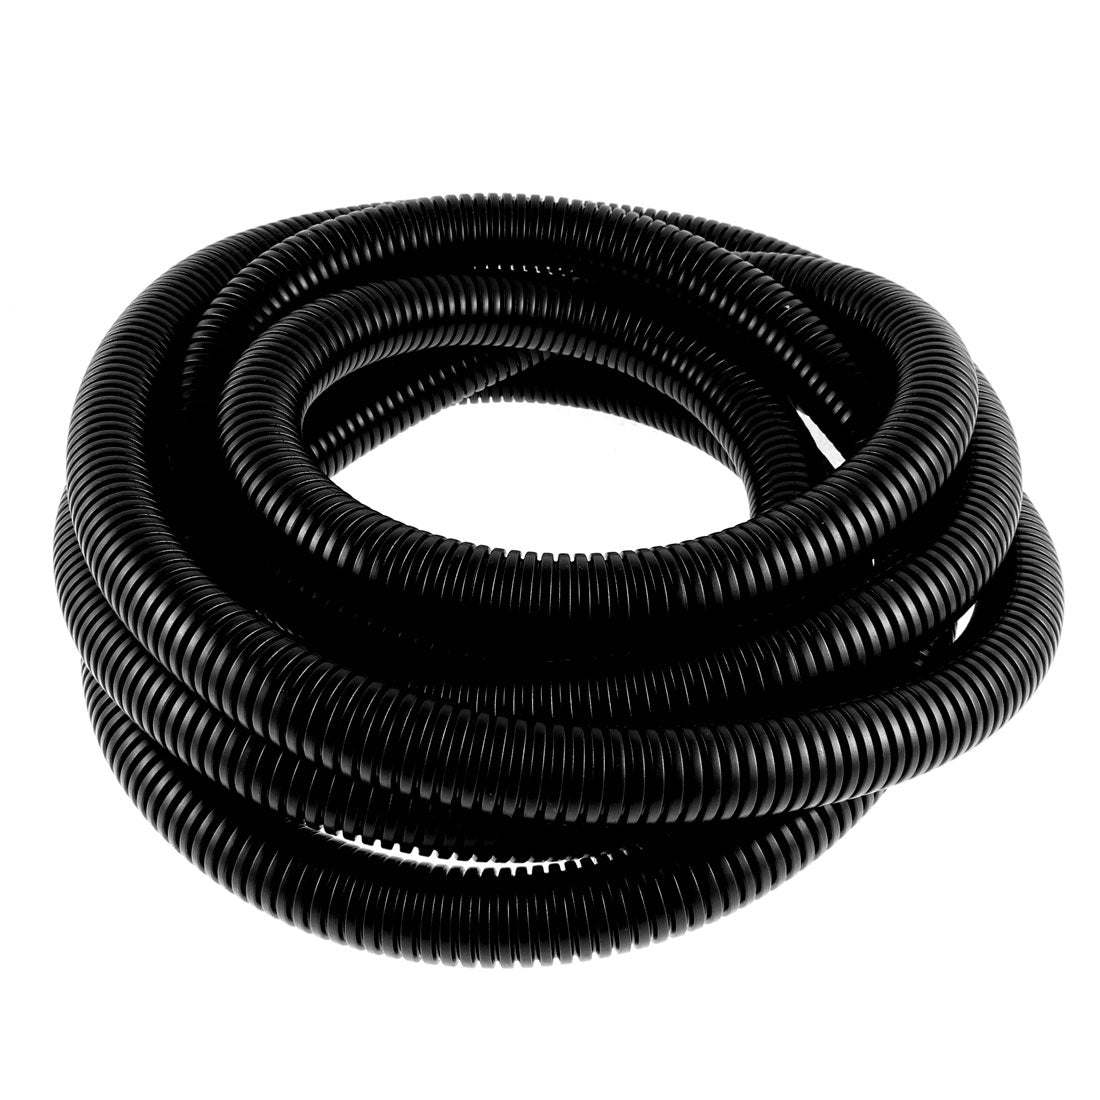 uxcell Uxcell 4.7 M 22 x 28 mm PVC Flexible Corrugated Conduit Tube for Garden,Office Black